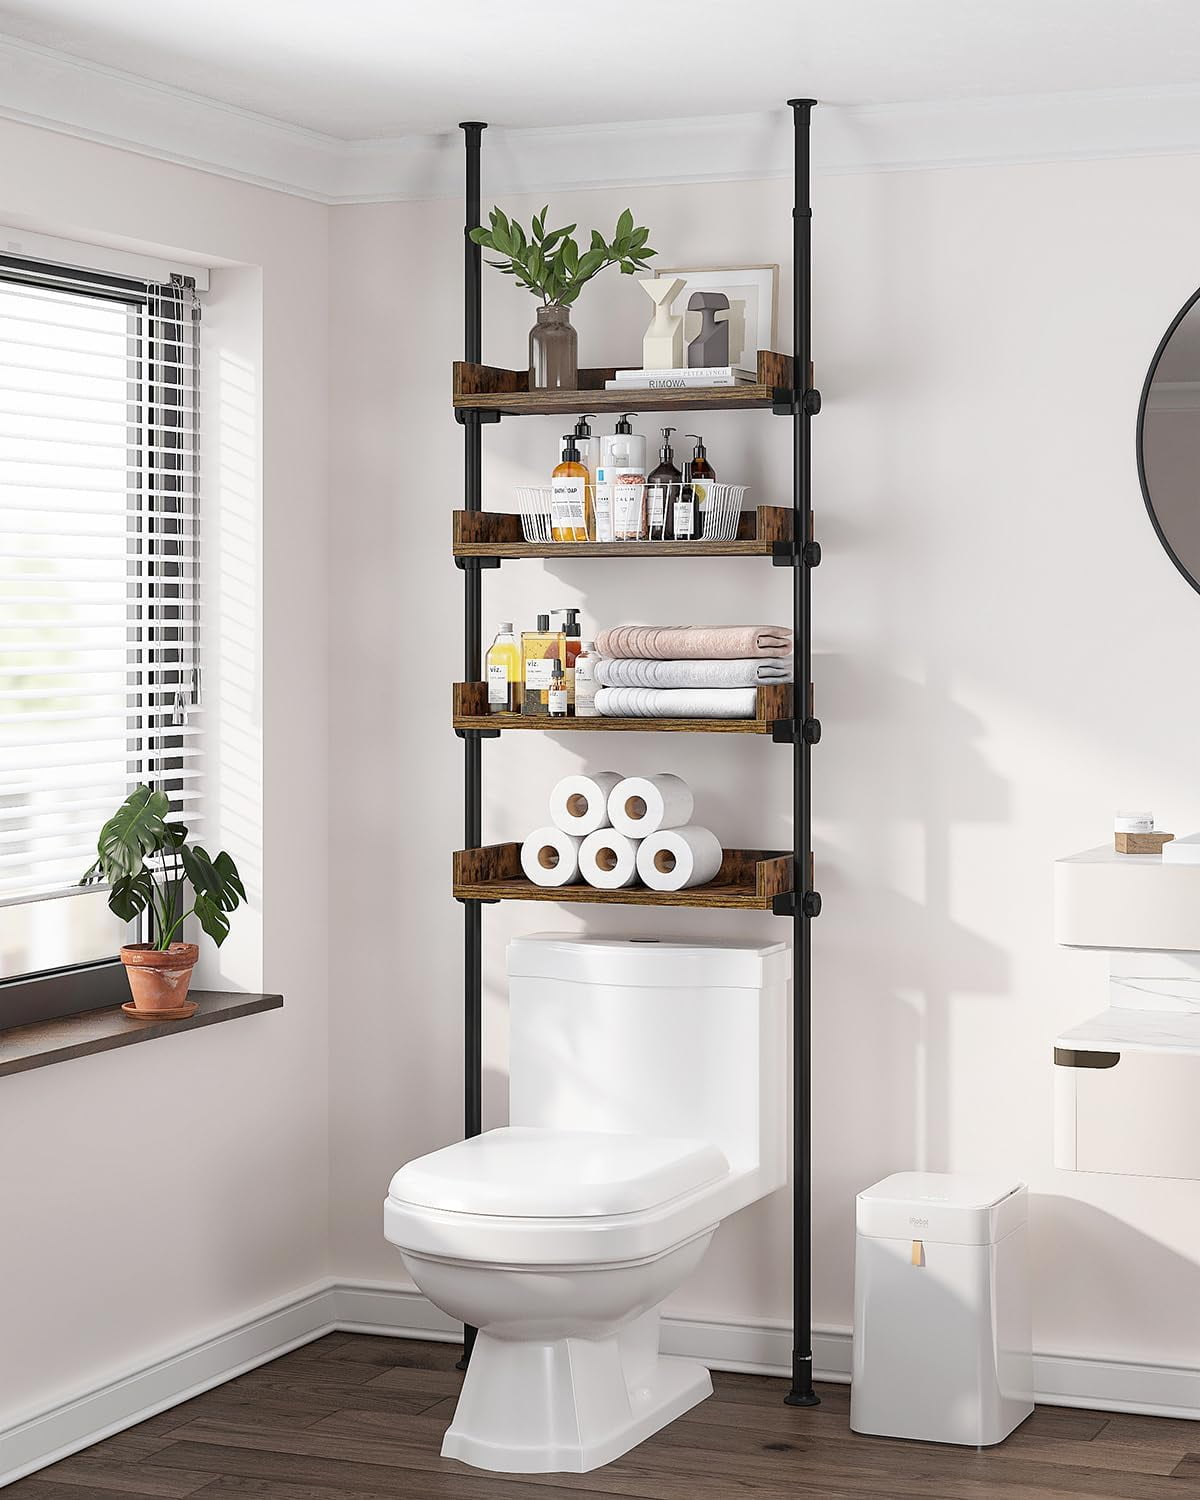 1 Bathroom Organizer. Over The Toilet Storage. 4-Tier Adjustable Wood Shelves for Small Rooms. Saver Space Rack. 92 to 116 Inch Tall. Narrow Cabinet. Rustic Brown